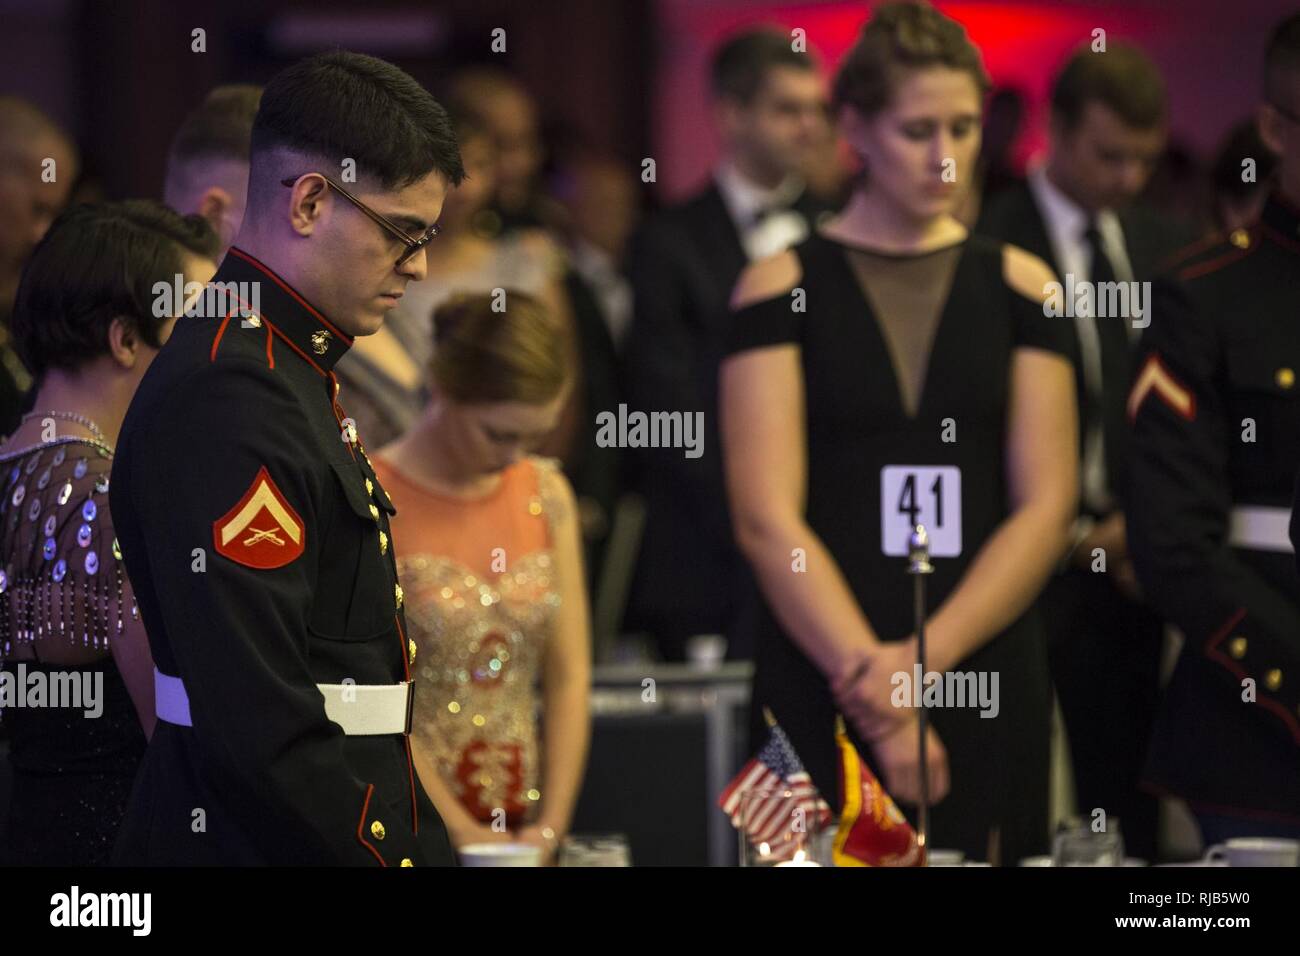 A U.S. Marine bows his head in prayer during the Headquarters & Service Battalion Marine Corps Ball at the Renaissance Arlington Capitol View Hotel, Arlington, Va., Nov. 05, 2016. The ball was held in celebration of the Marine Corps’ 241st birthday. Stock Photo